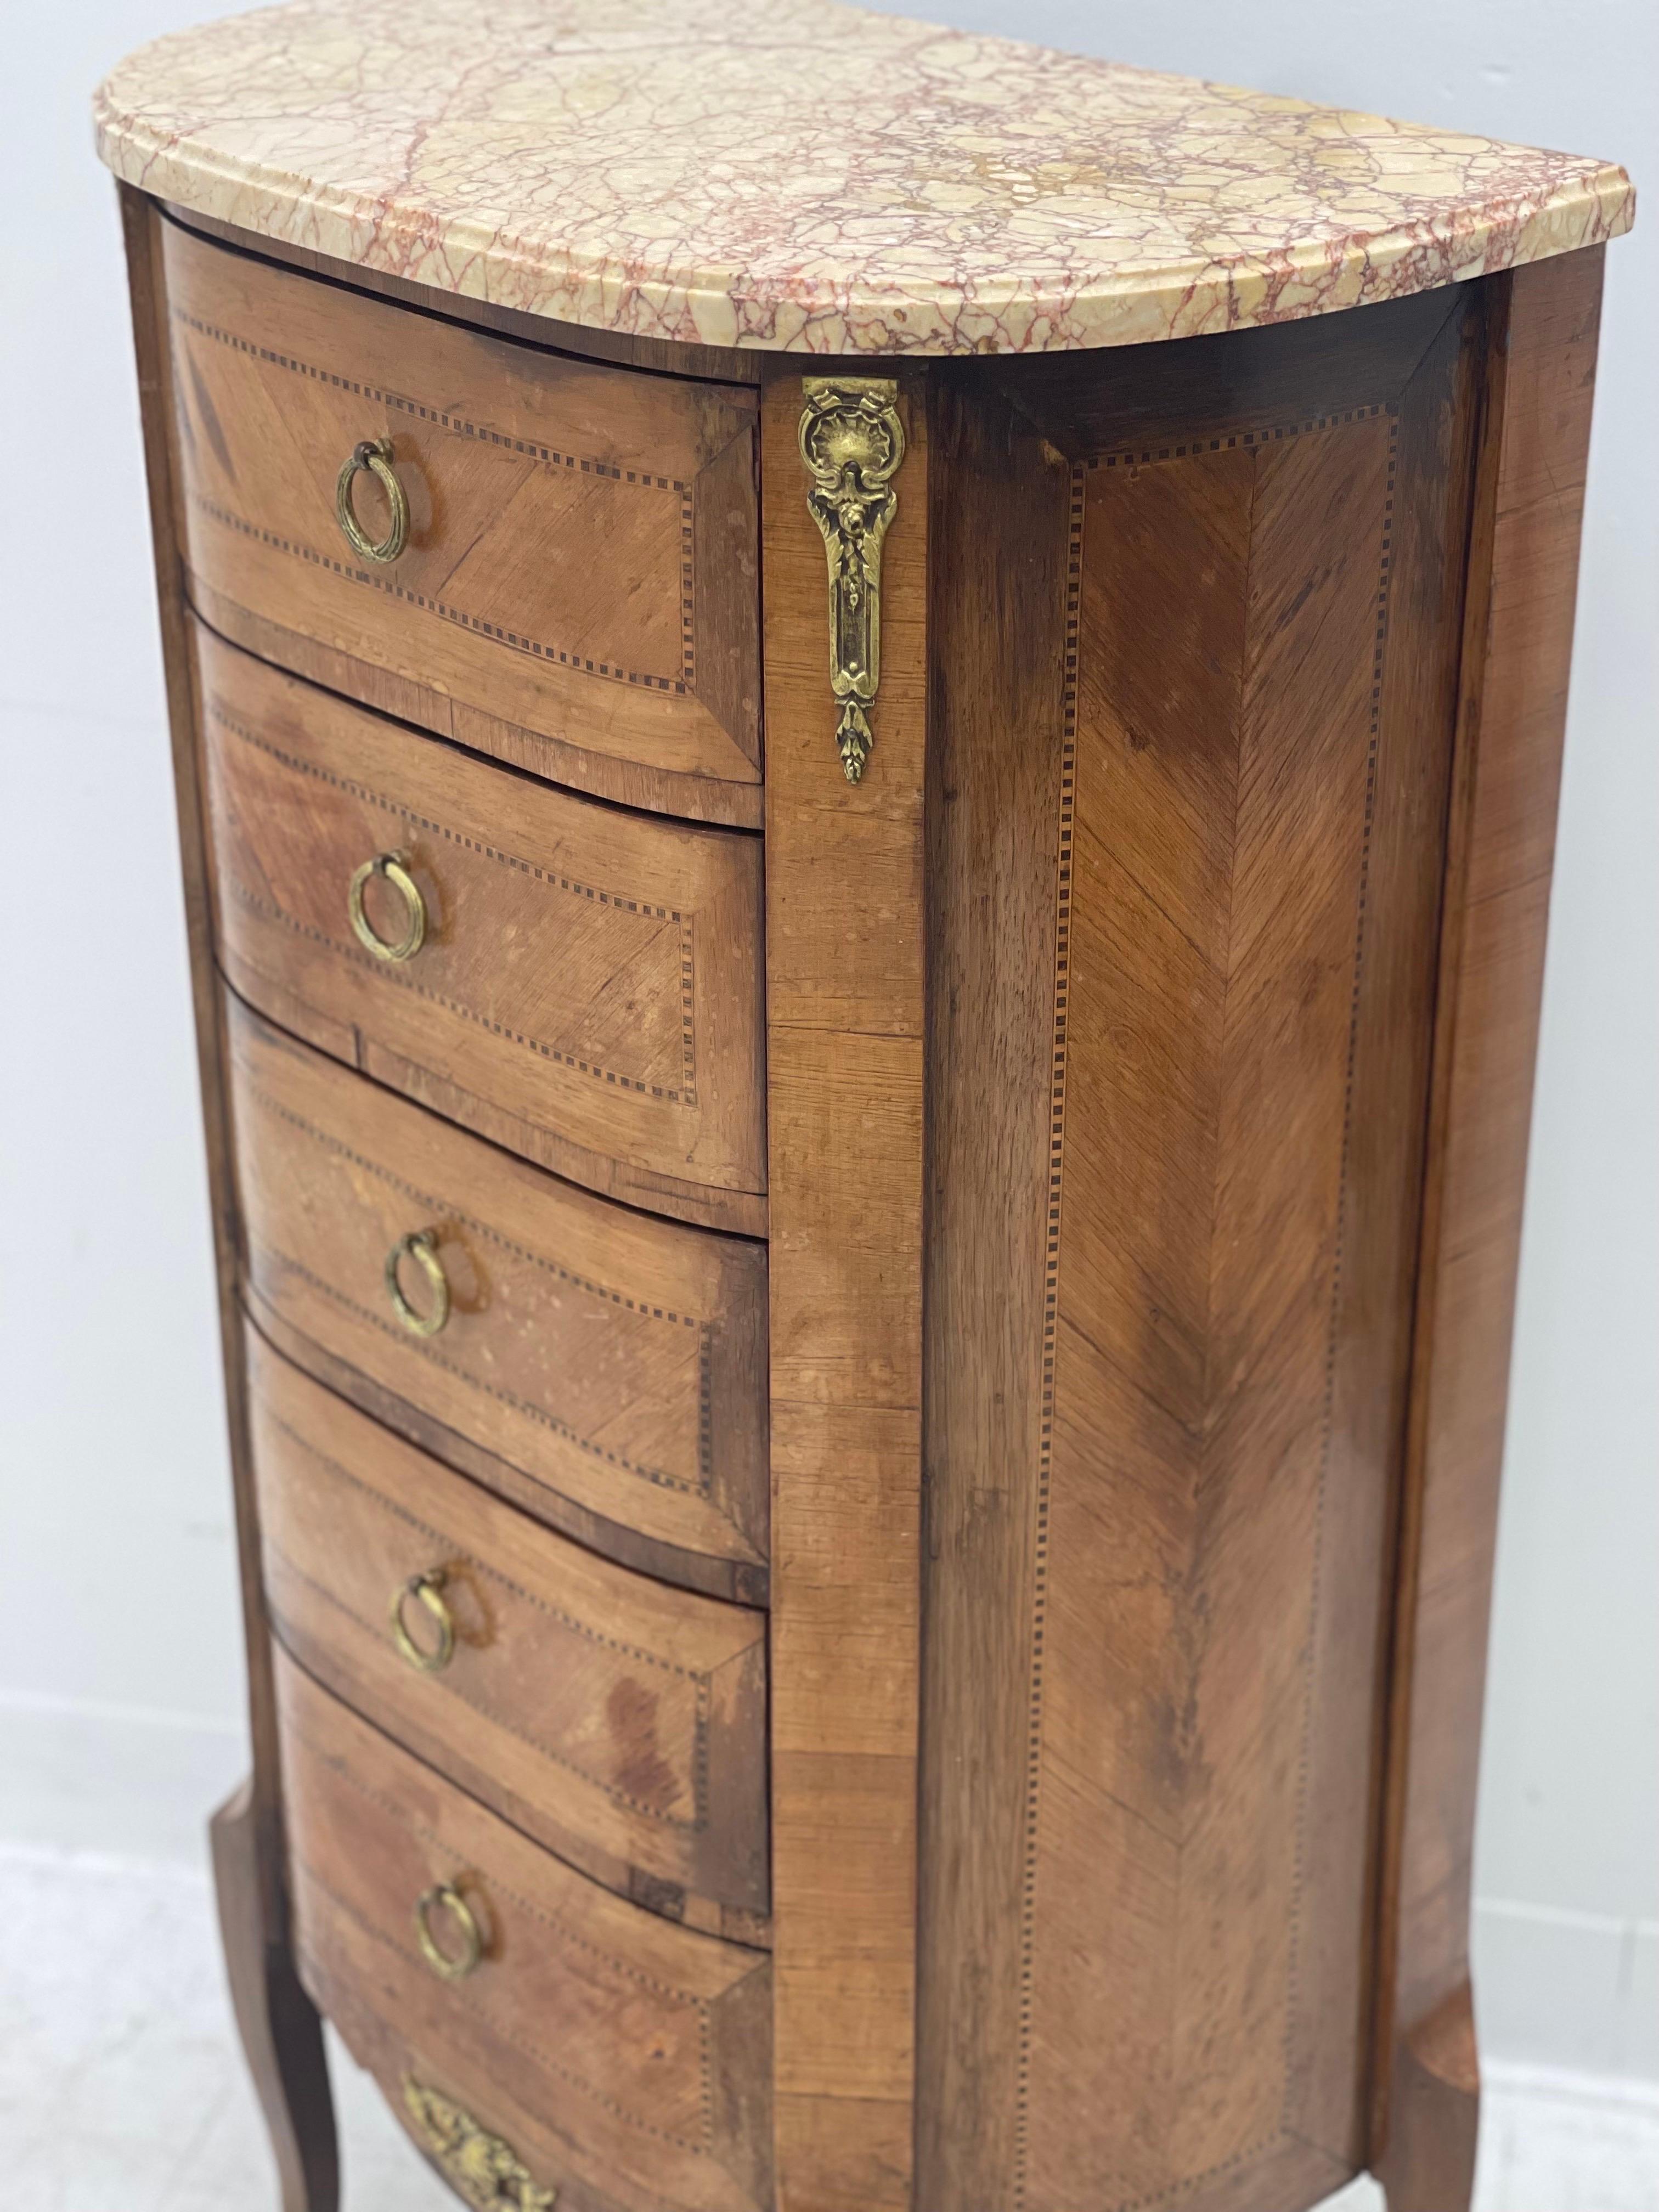 Edwardian cabinet Circa, 1900s marble top dovetail drawers storage

Dimensions. 22 W ; 40 H ; 12 1/2 D.